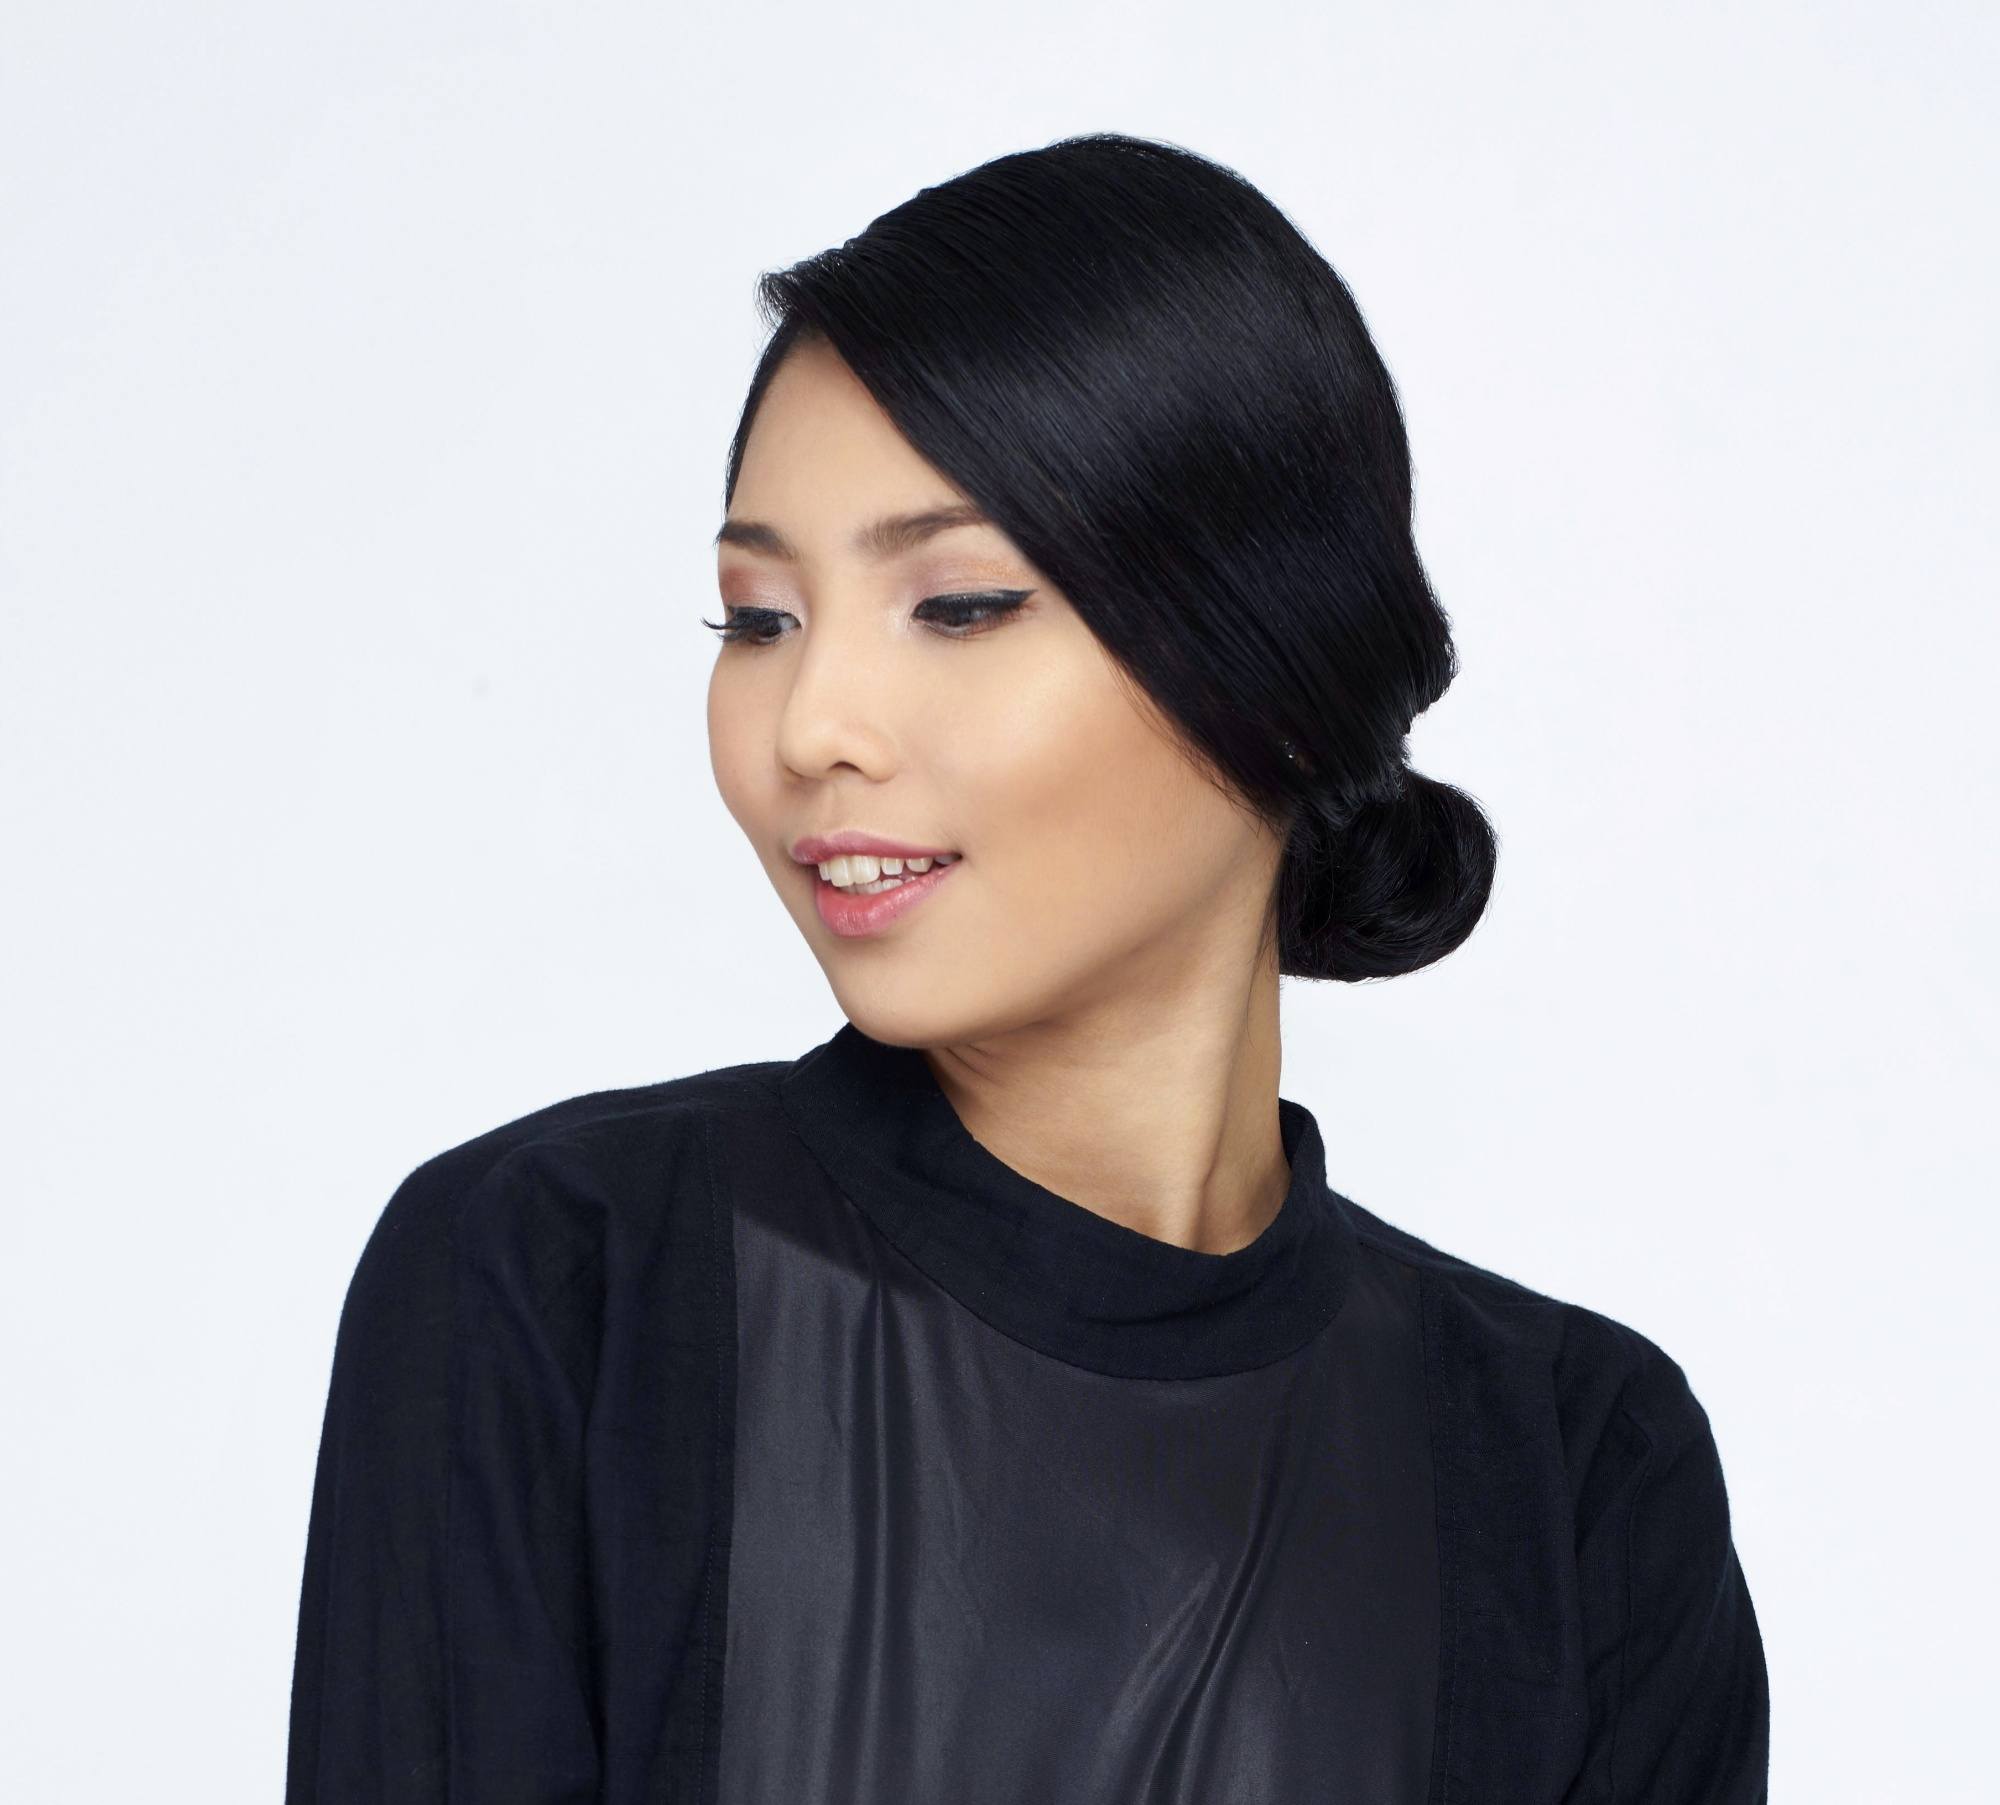 Closeup shot of an Asian woman with chignon updo hairstyle